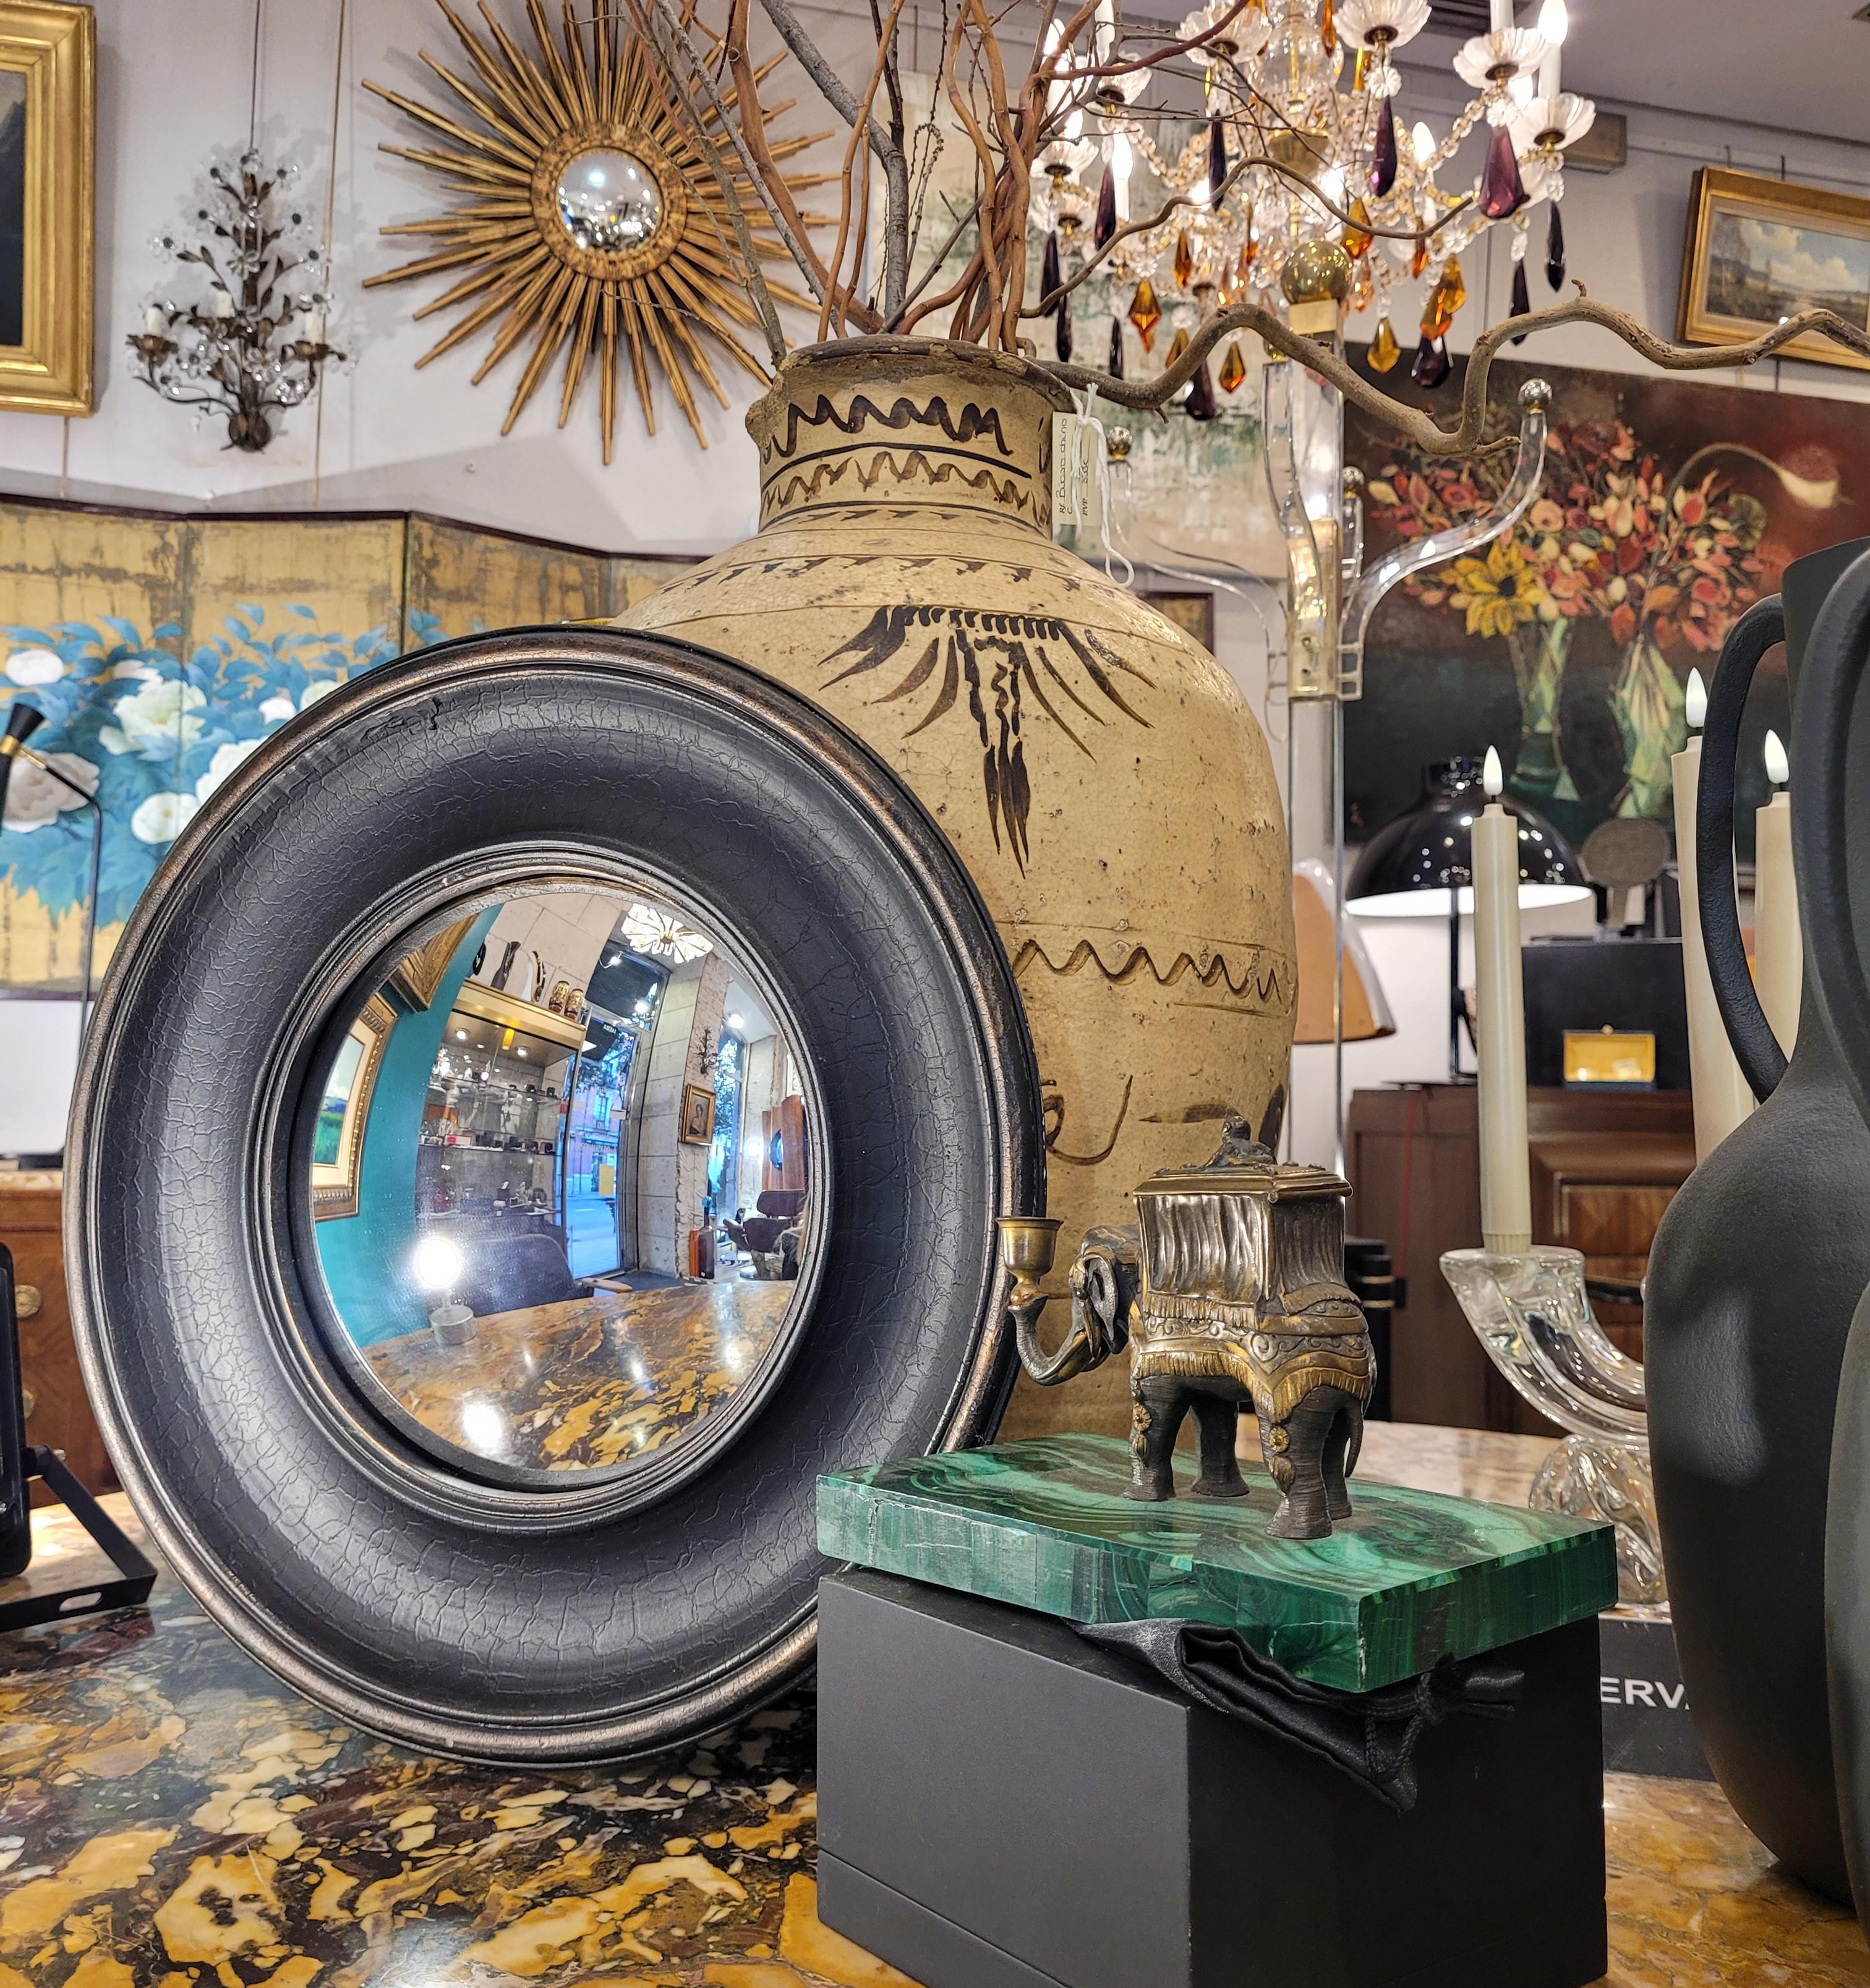  Gorgeous French Black Convex mirror, vintage frame, late 20th century - France.
Beautiful and very trendy vintage convex mirror, with a black frame with a cracked and worn effect on the edges of the outer ring. At the same time, it presents